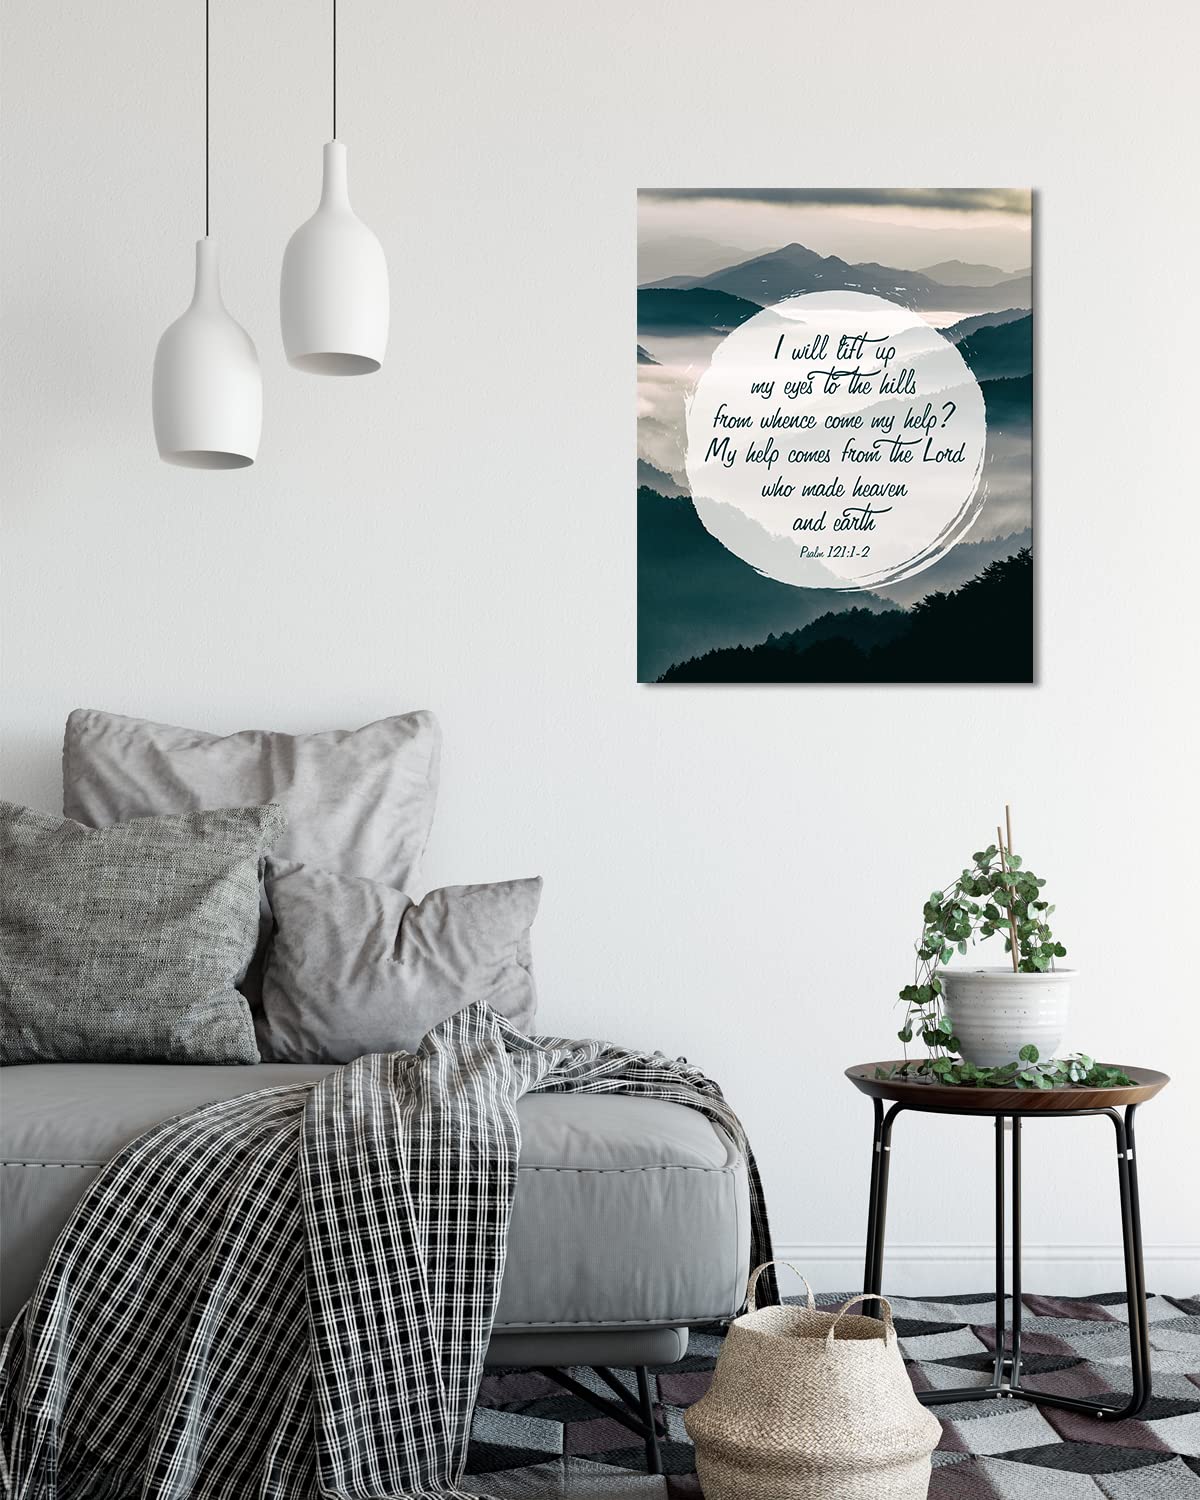 My Help Comes From The Lord - Psalm 121:1-2 Bible Verse - Christian Home Decor - Religious Scriptures Wall Art